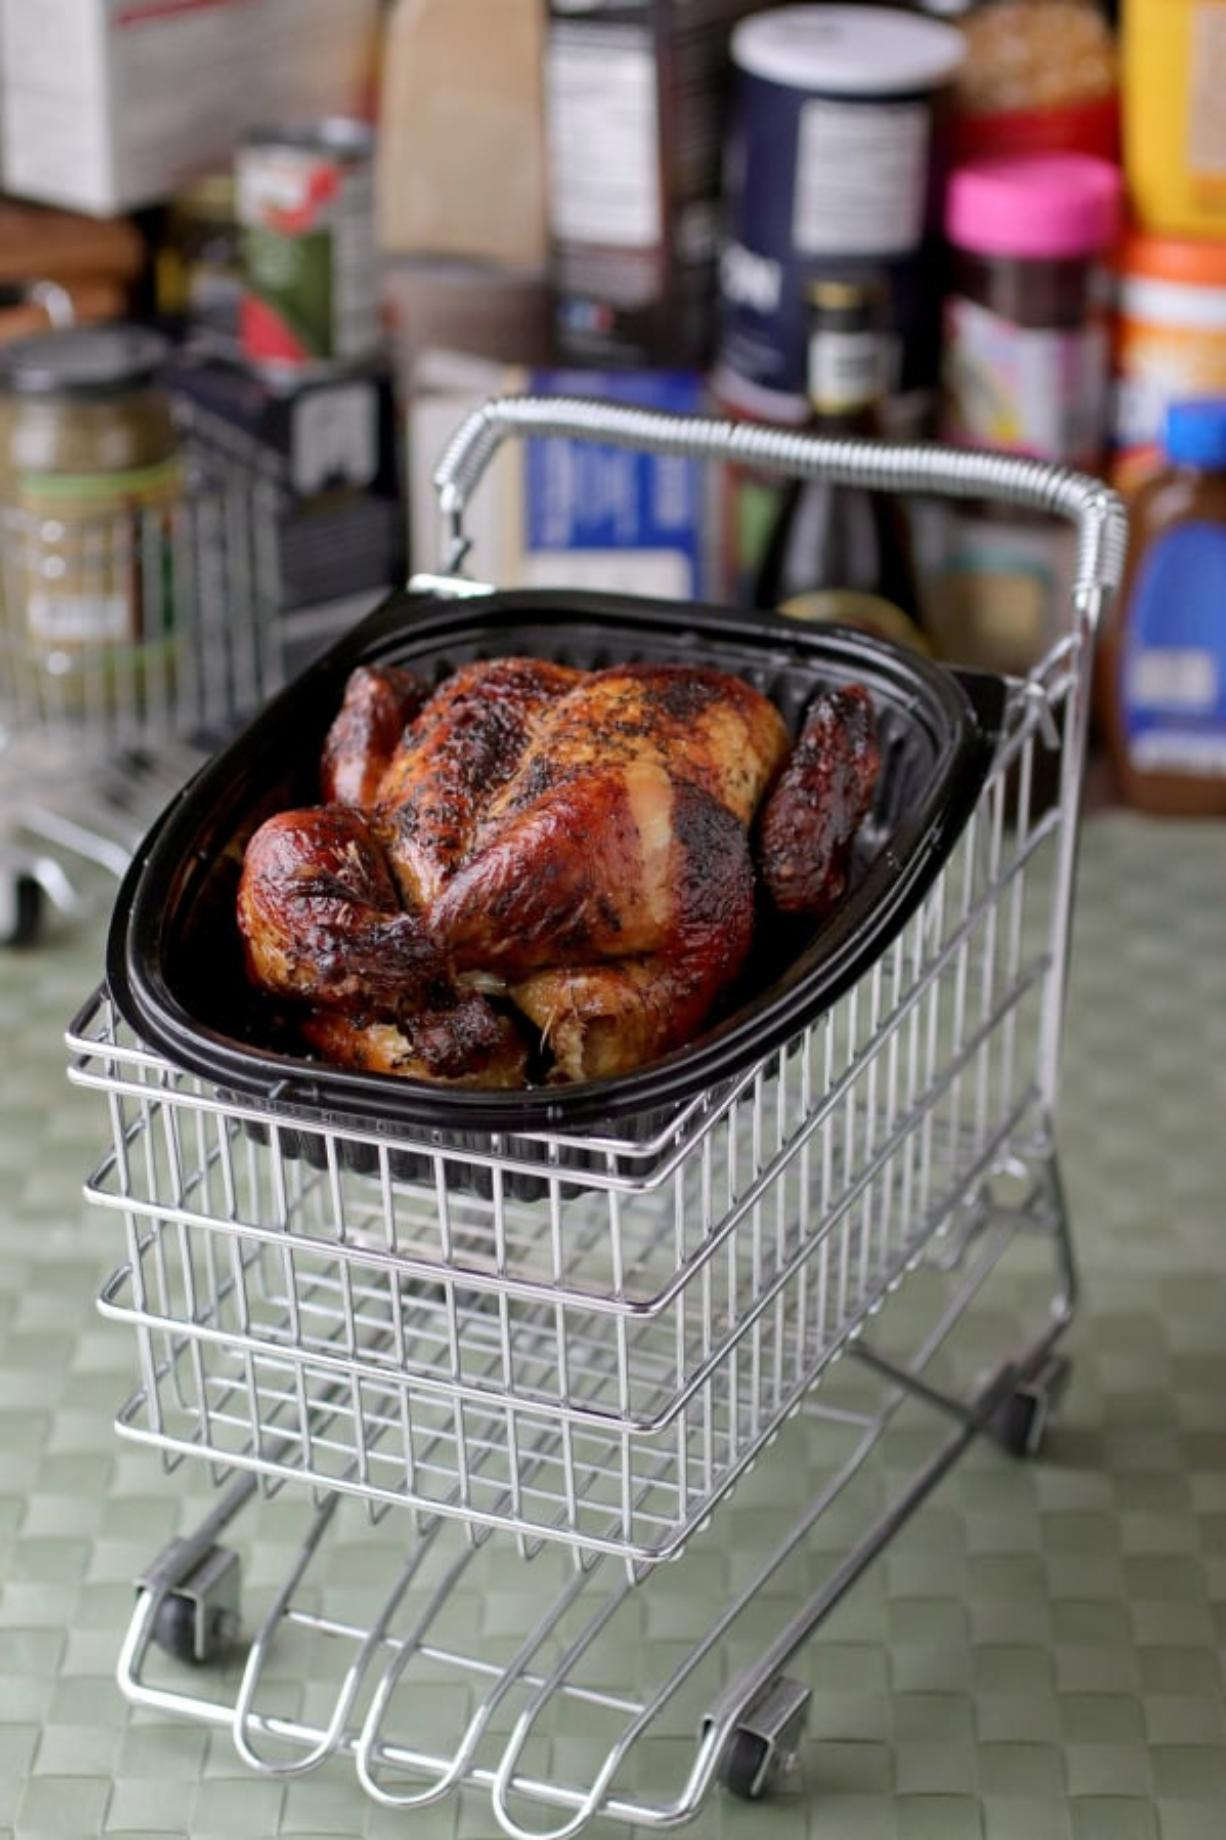 Rotisserie chicken makes dinner easy; try these easy recipes - www.bagsaleusa.com